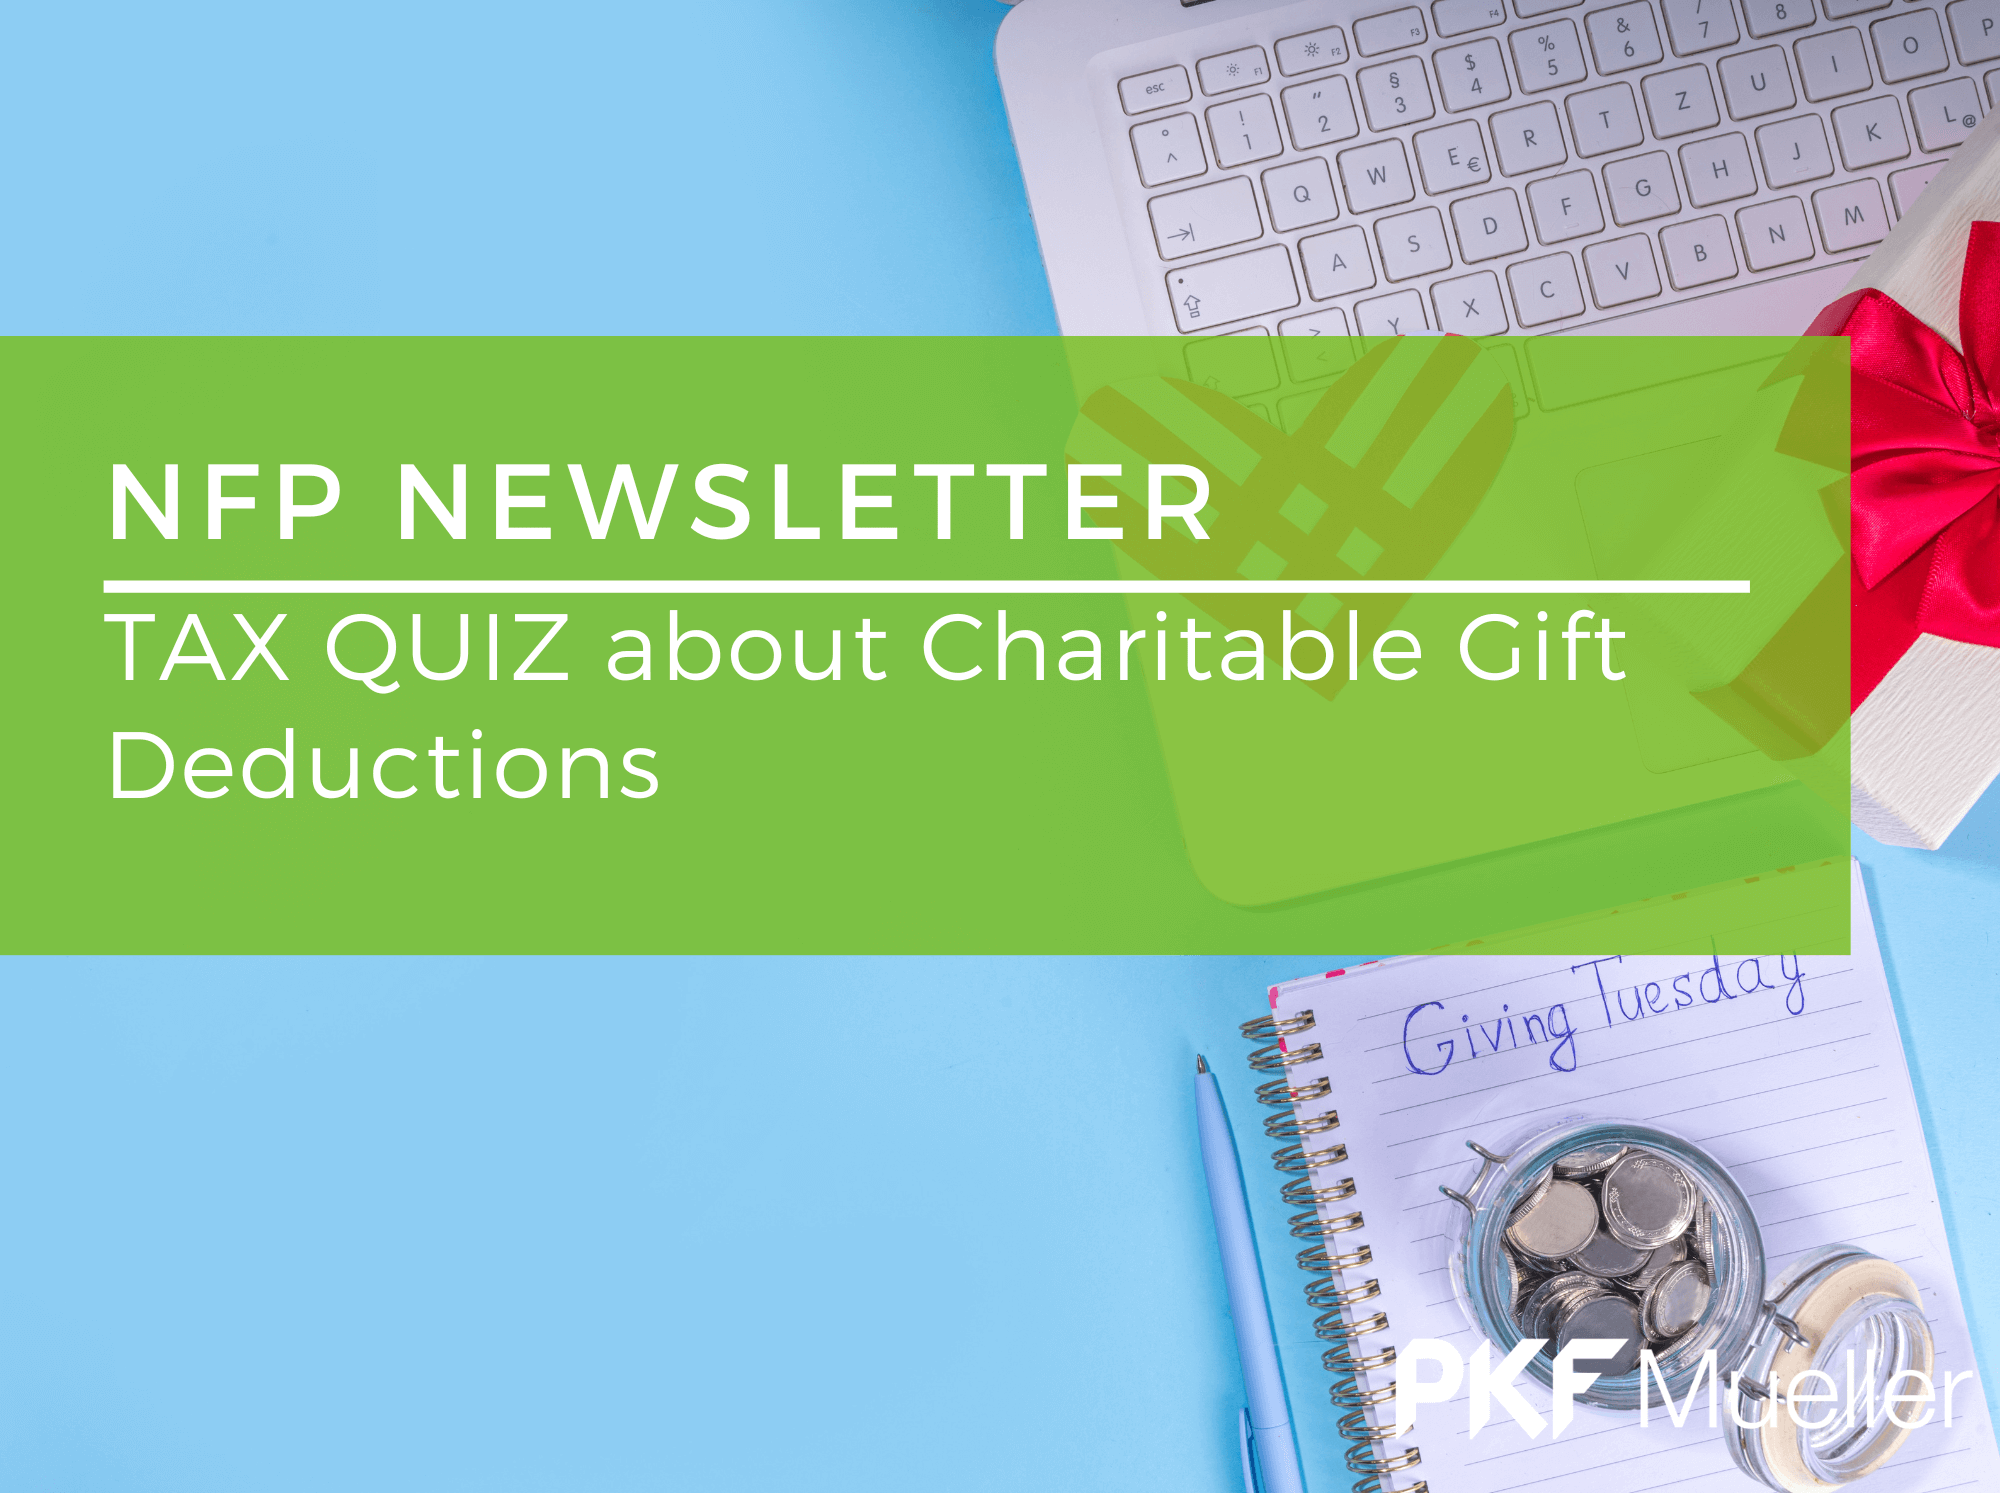 TAX QUIZ about Charitable Gift Deductions